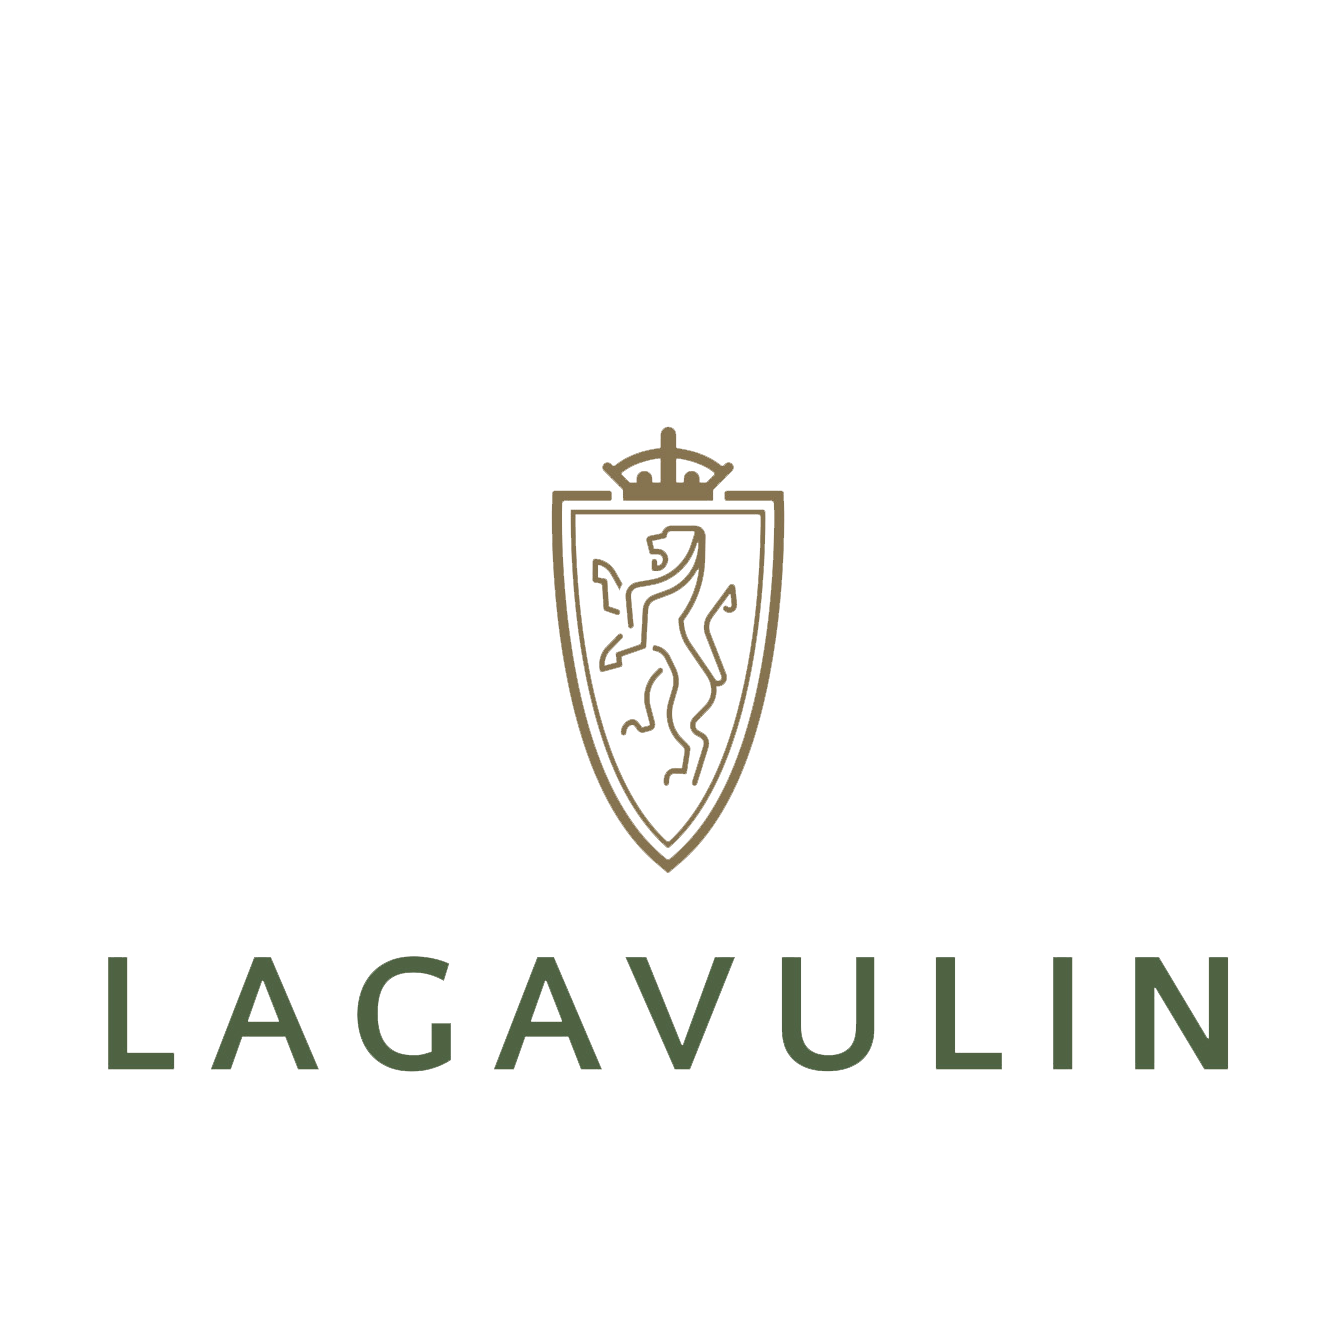 lagavulin without background.png